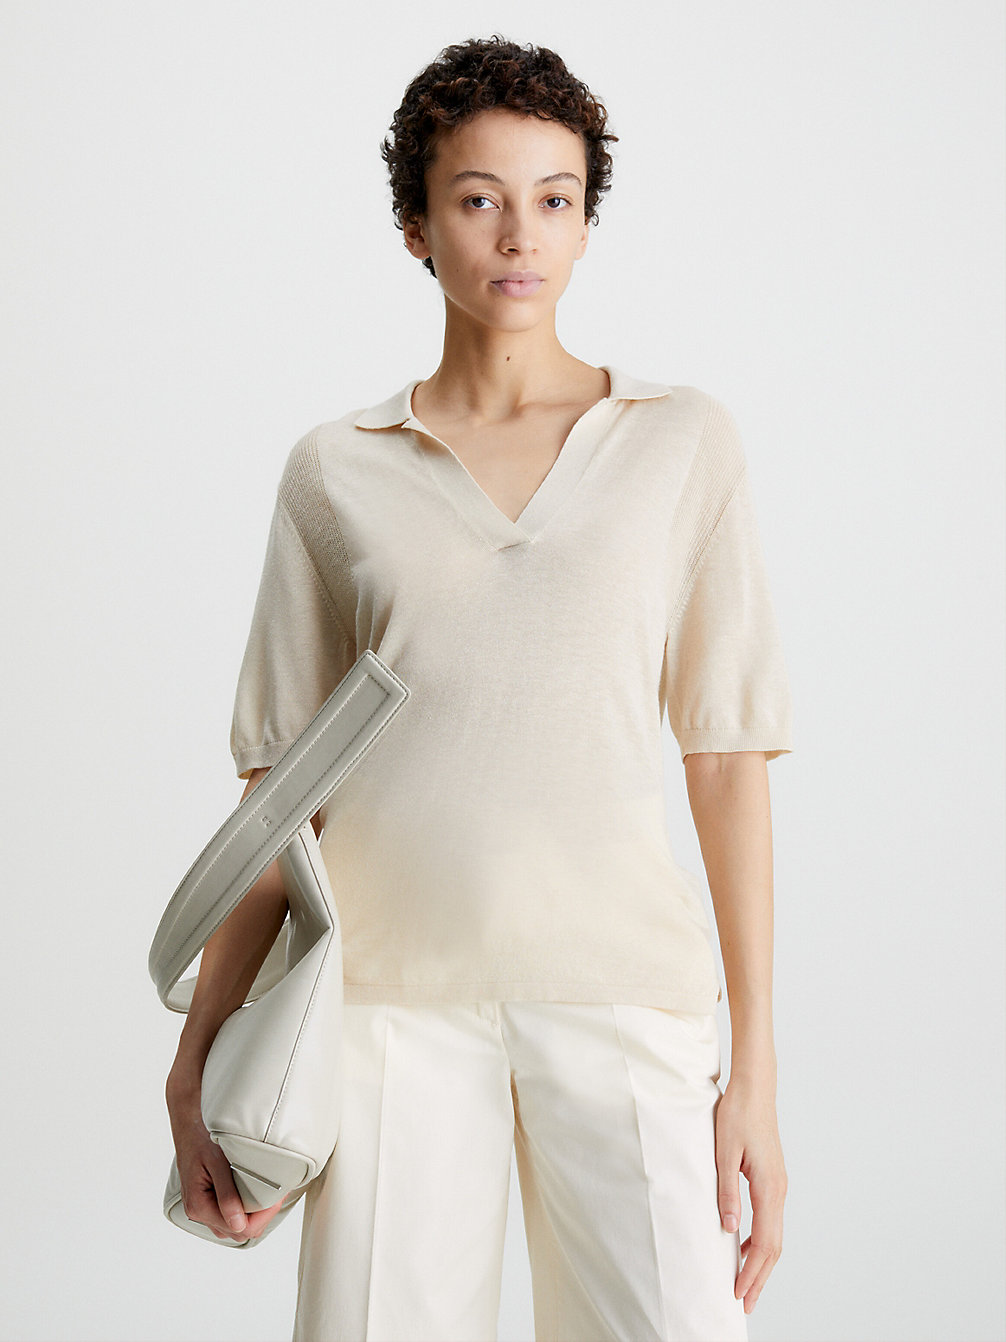 Maglione Polo In Lana Lyocell > SMOOTH BEIGE > undefined donna > Calvin Klein